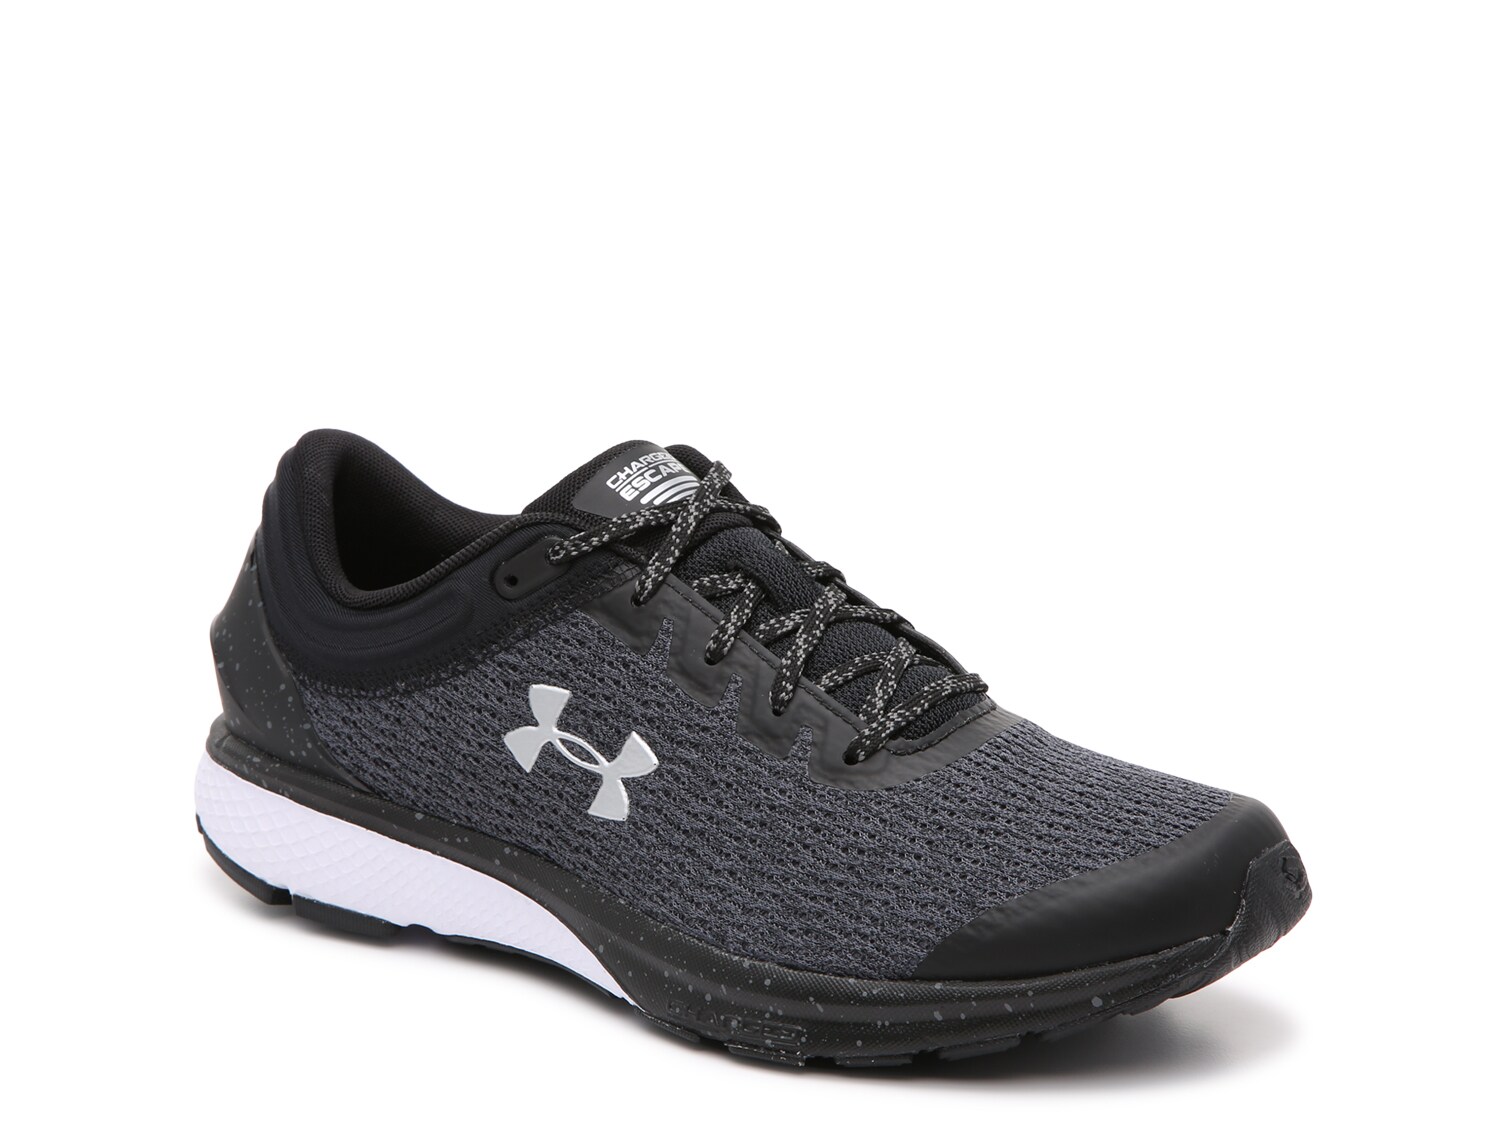 under armour black and grey shoes